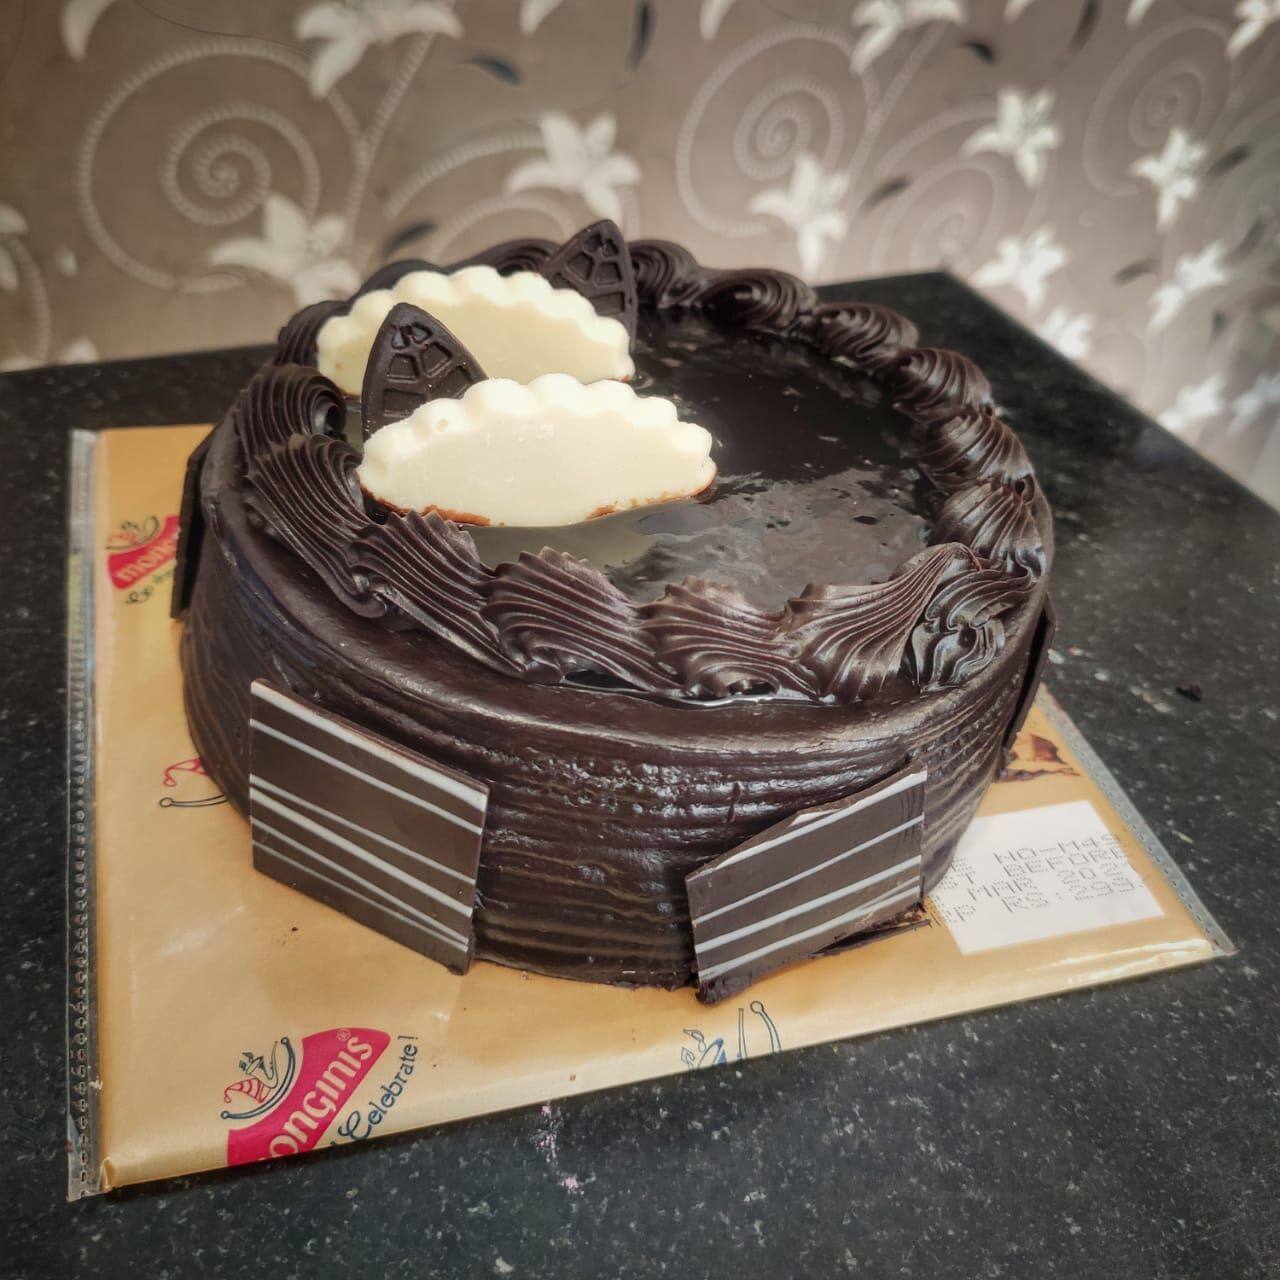 Monginis Cake Shops Odisha on Twitter Monginis Cake Shop Odisha  offering a wide range of scrumptious delicious with real fruits and fresh  cakes Get the special Black Forest Cake Rs 375 amp